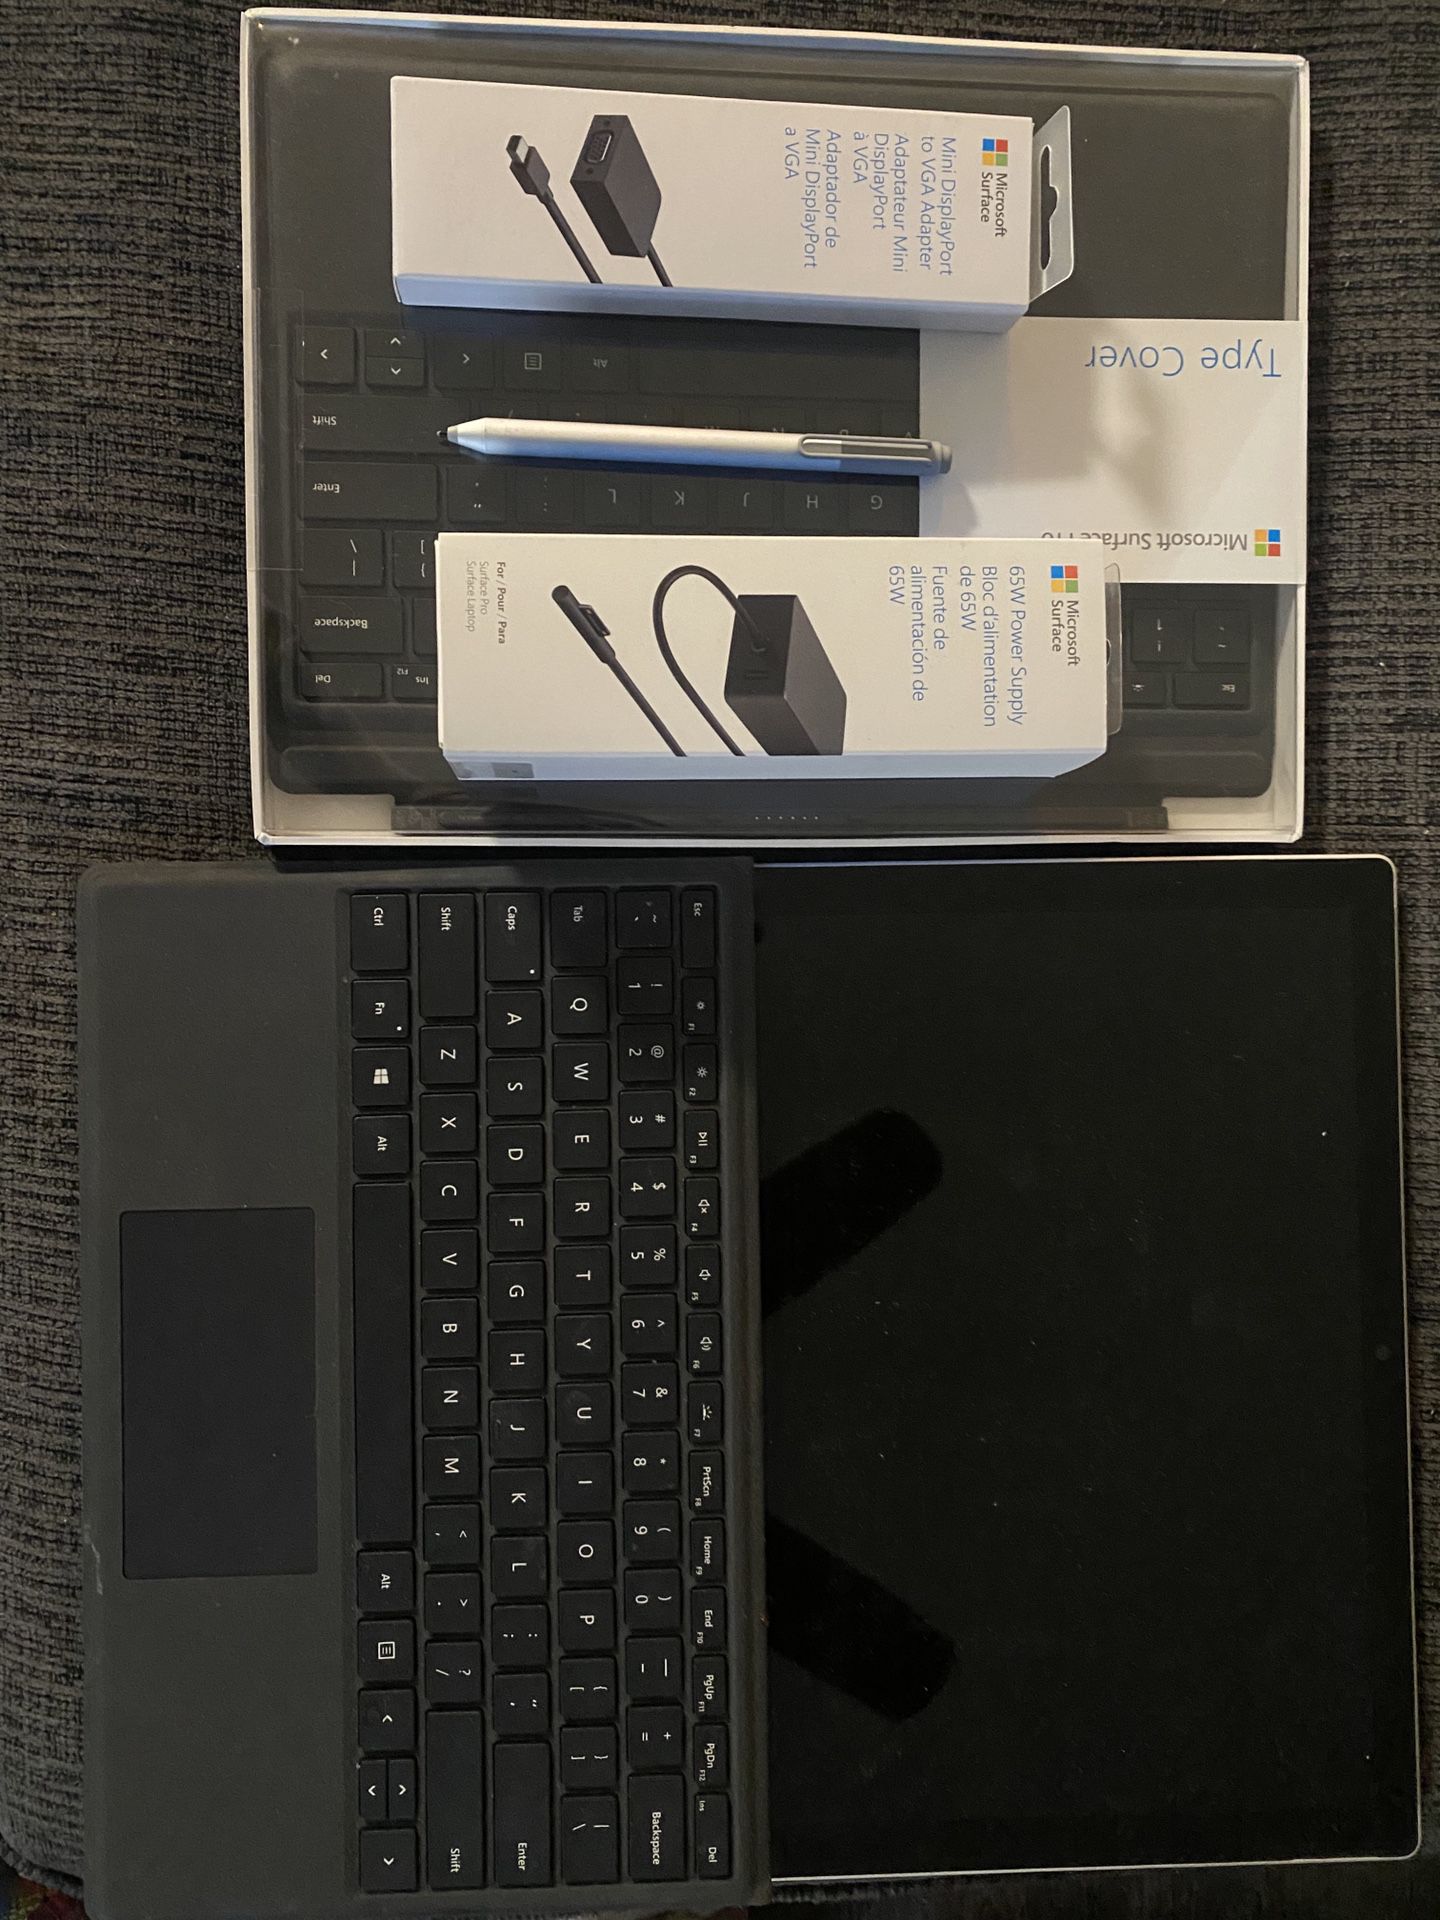 512Gb I4 Microsoft surface pro 16gb ram asking for 300 for everything obo